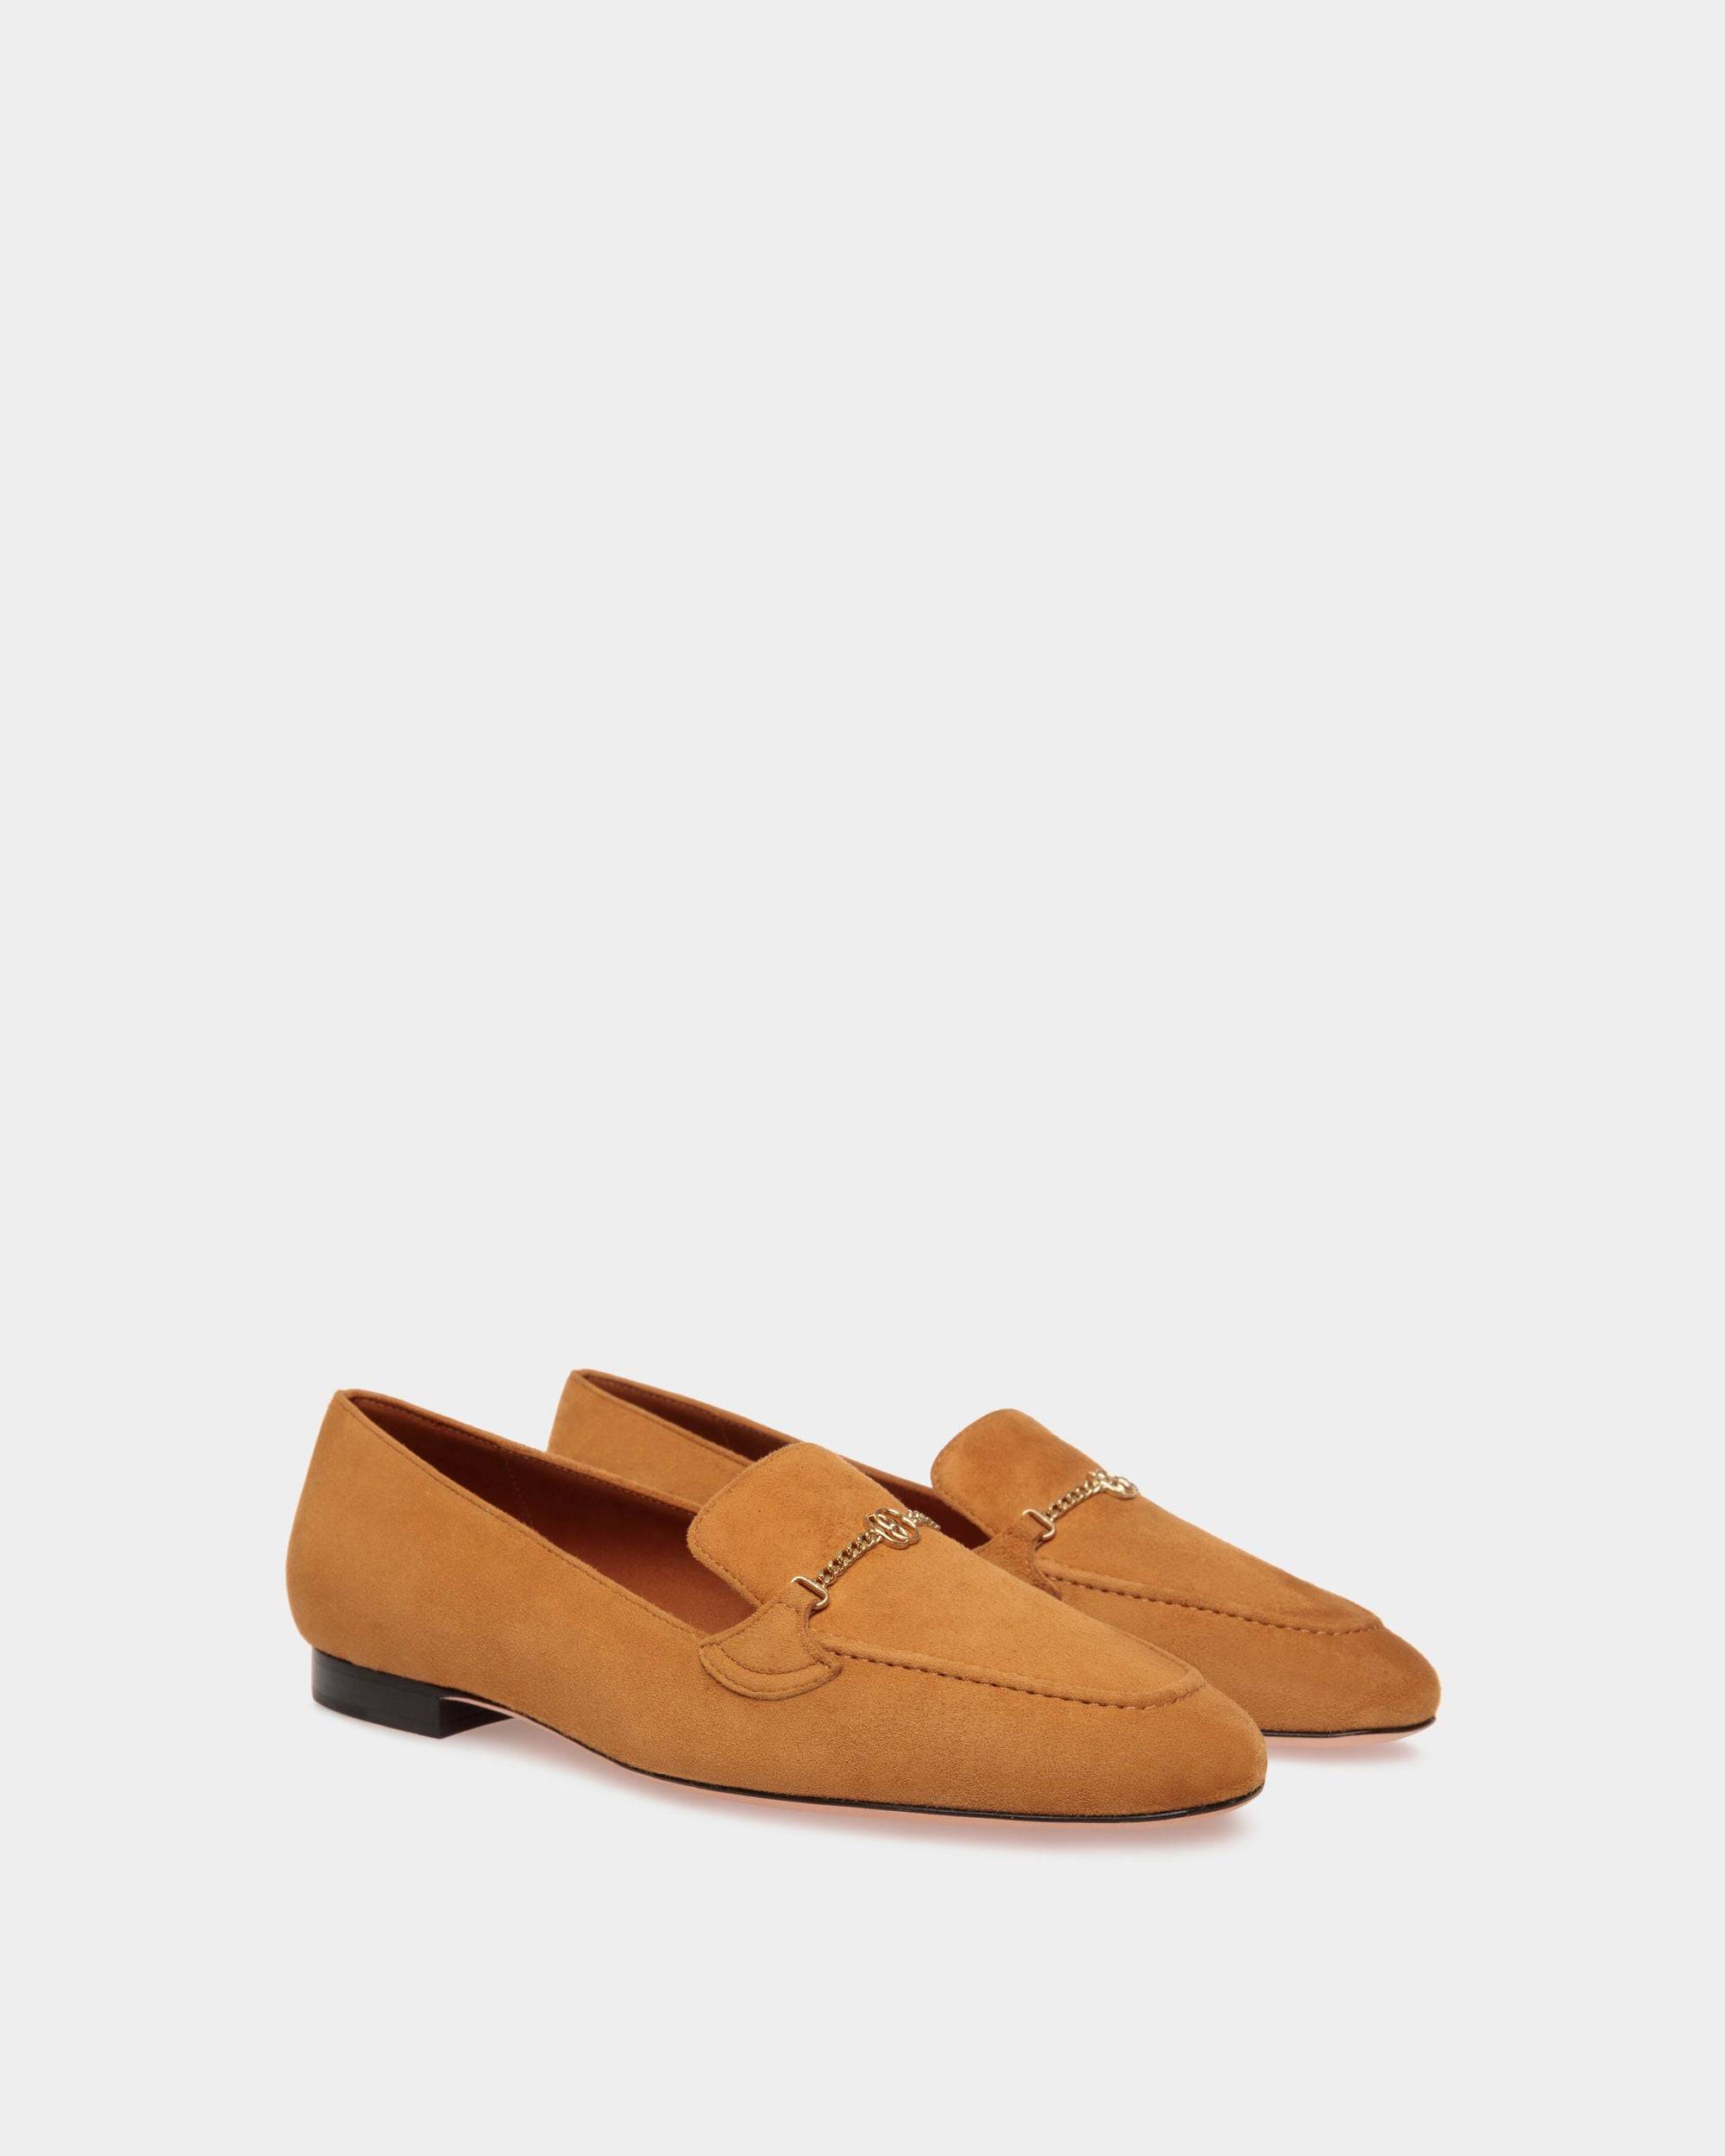 Daily Emblem | Women's Loafer in Brown Suede | Bally | Still Life 3/4 Front